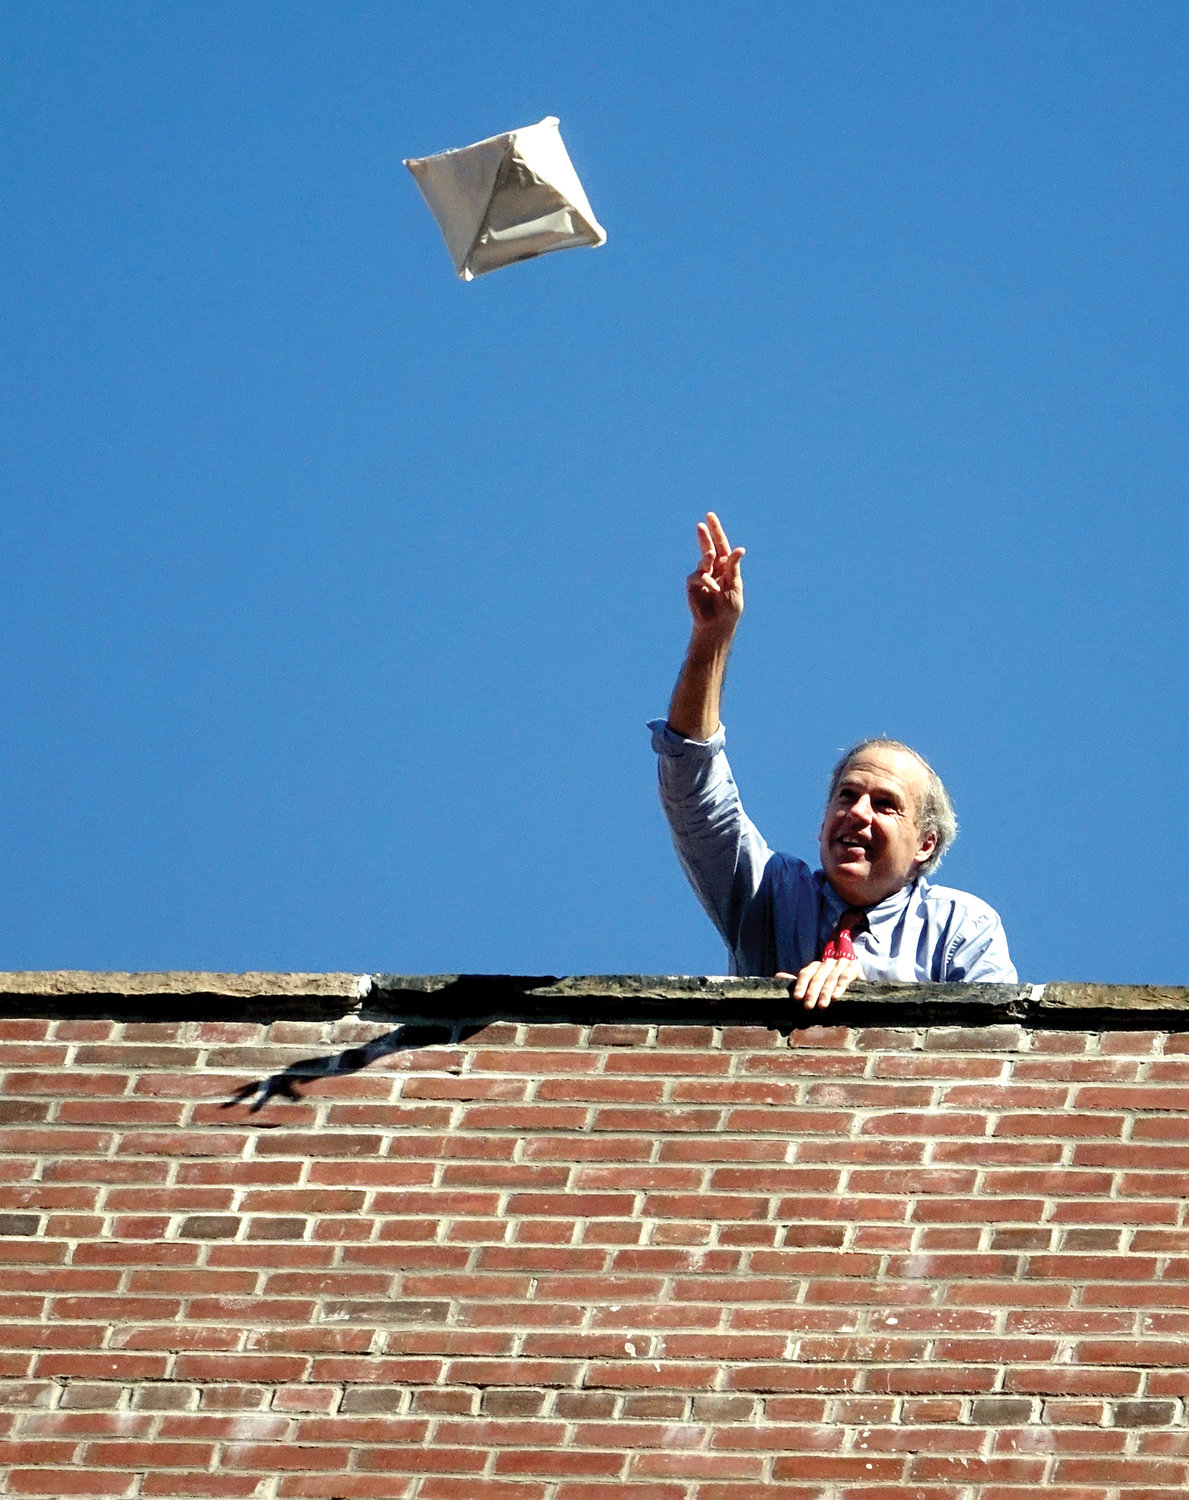 Science teacher William Hawthorn lofts a parachute and egg from the roof.